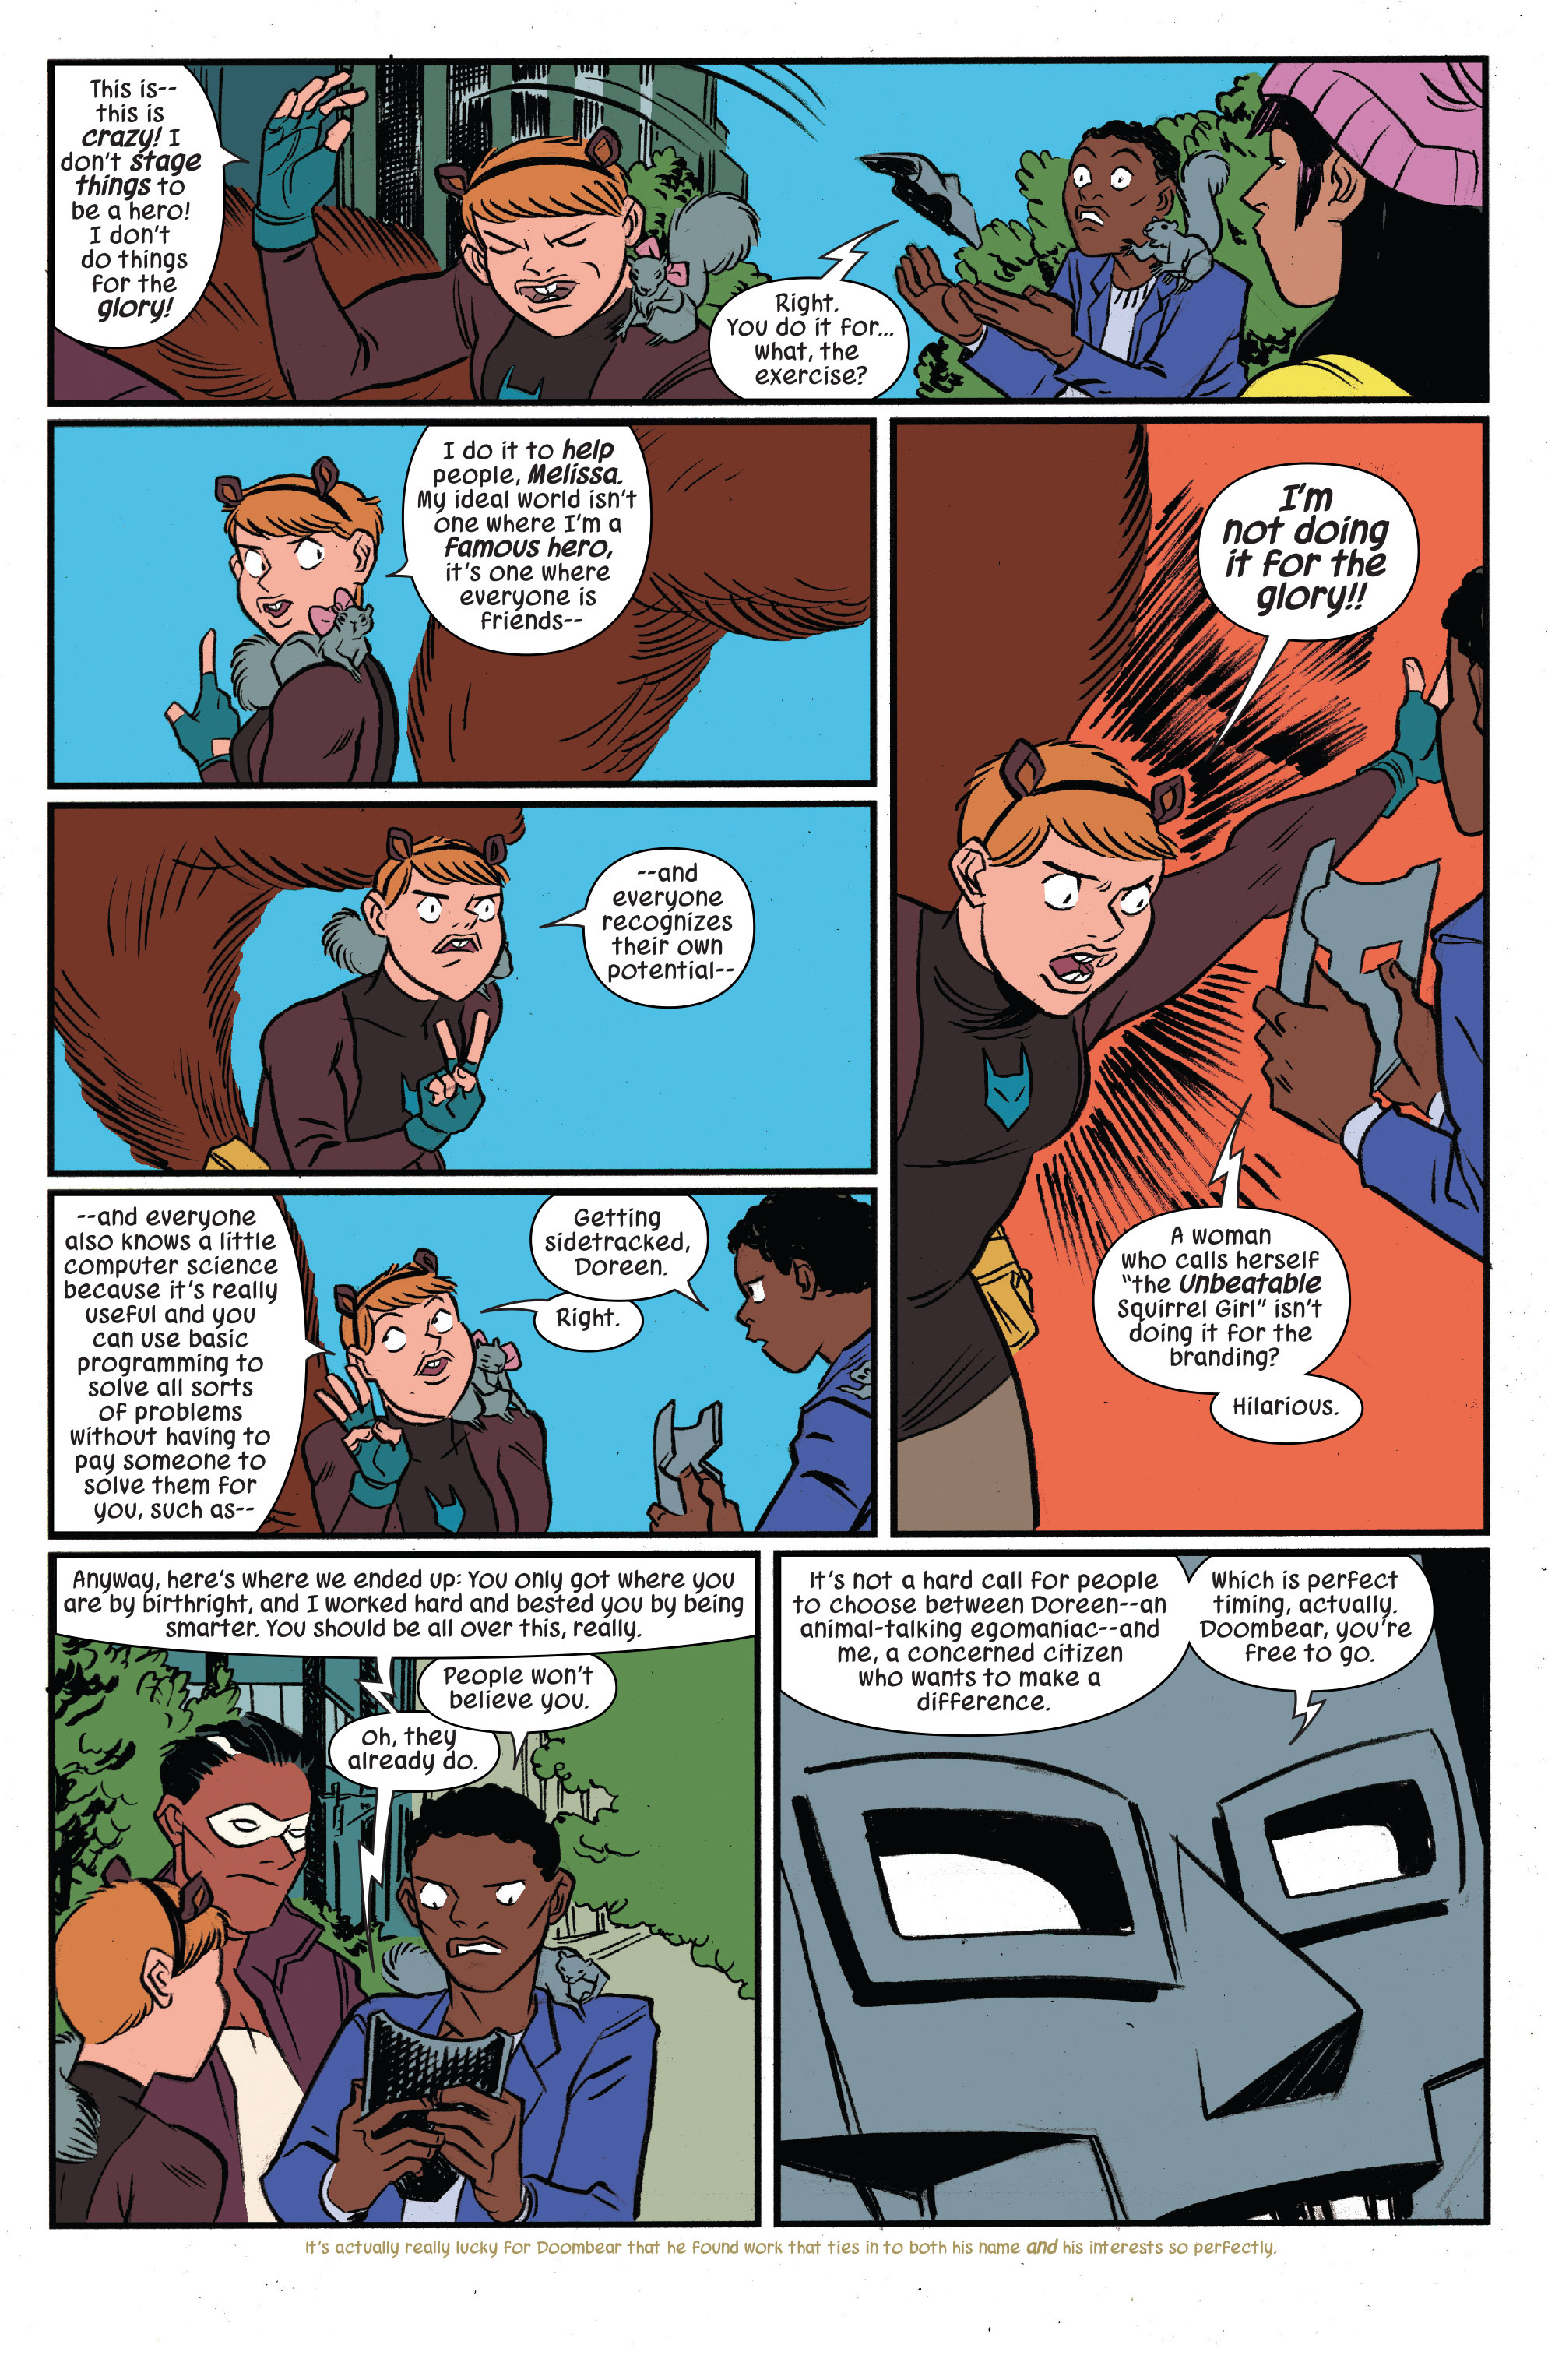 The Unbeatable Squirrel Girl Vol 2 15 Chapter Page 9